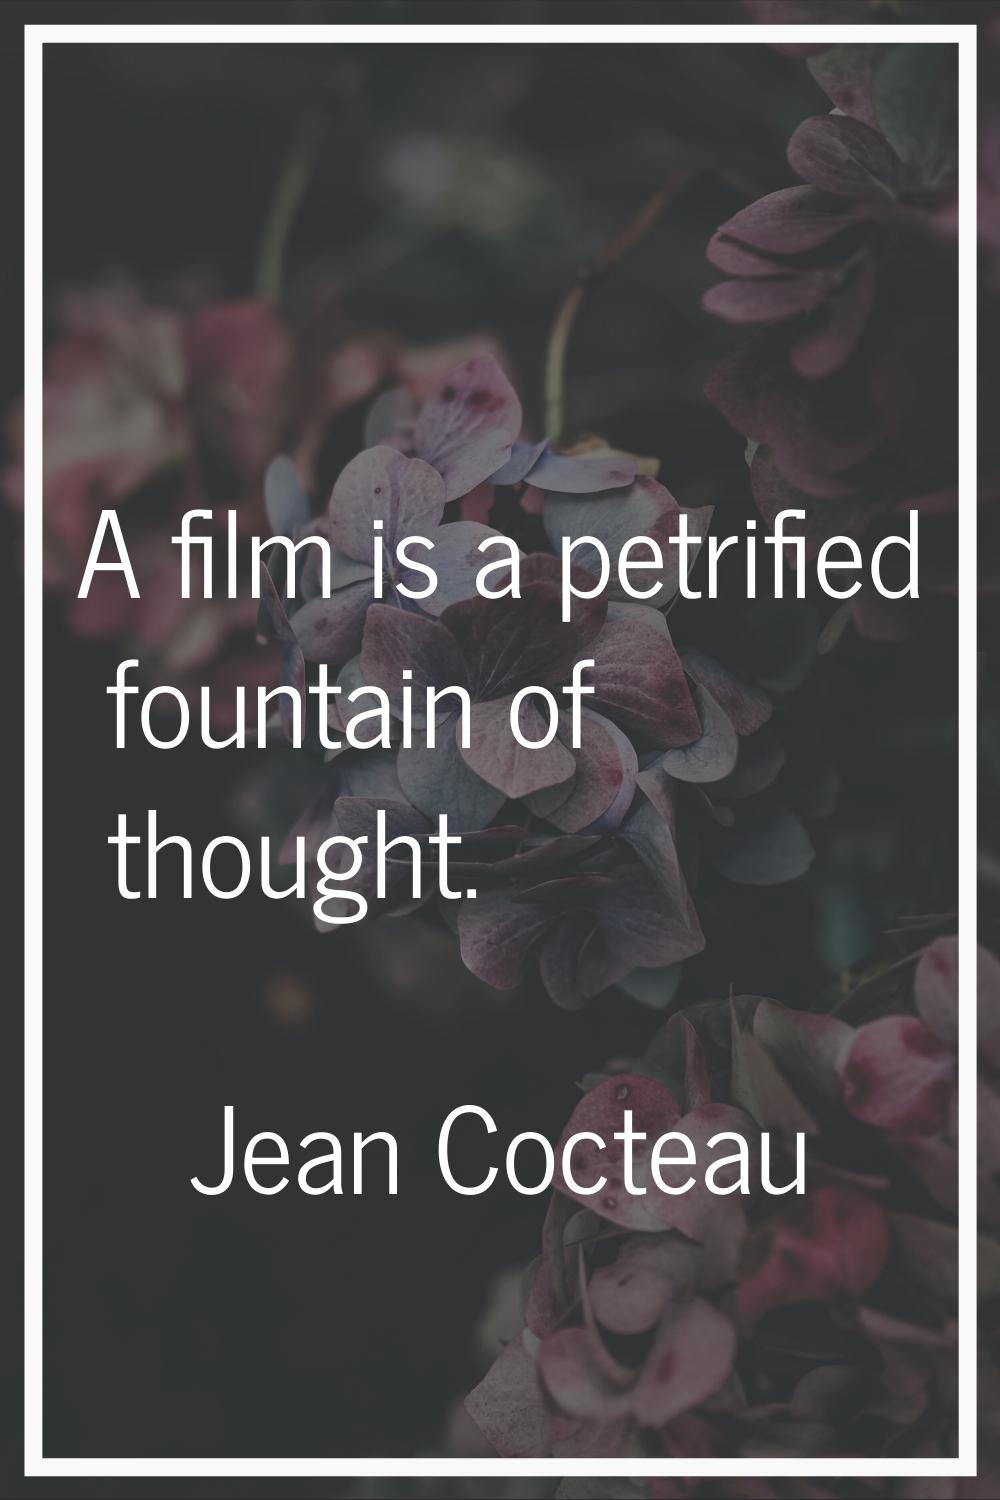 A film is a petrified fountain of thought.